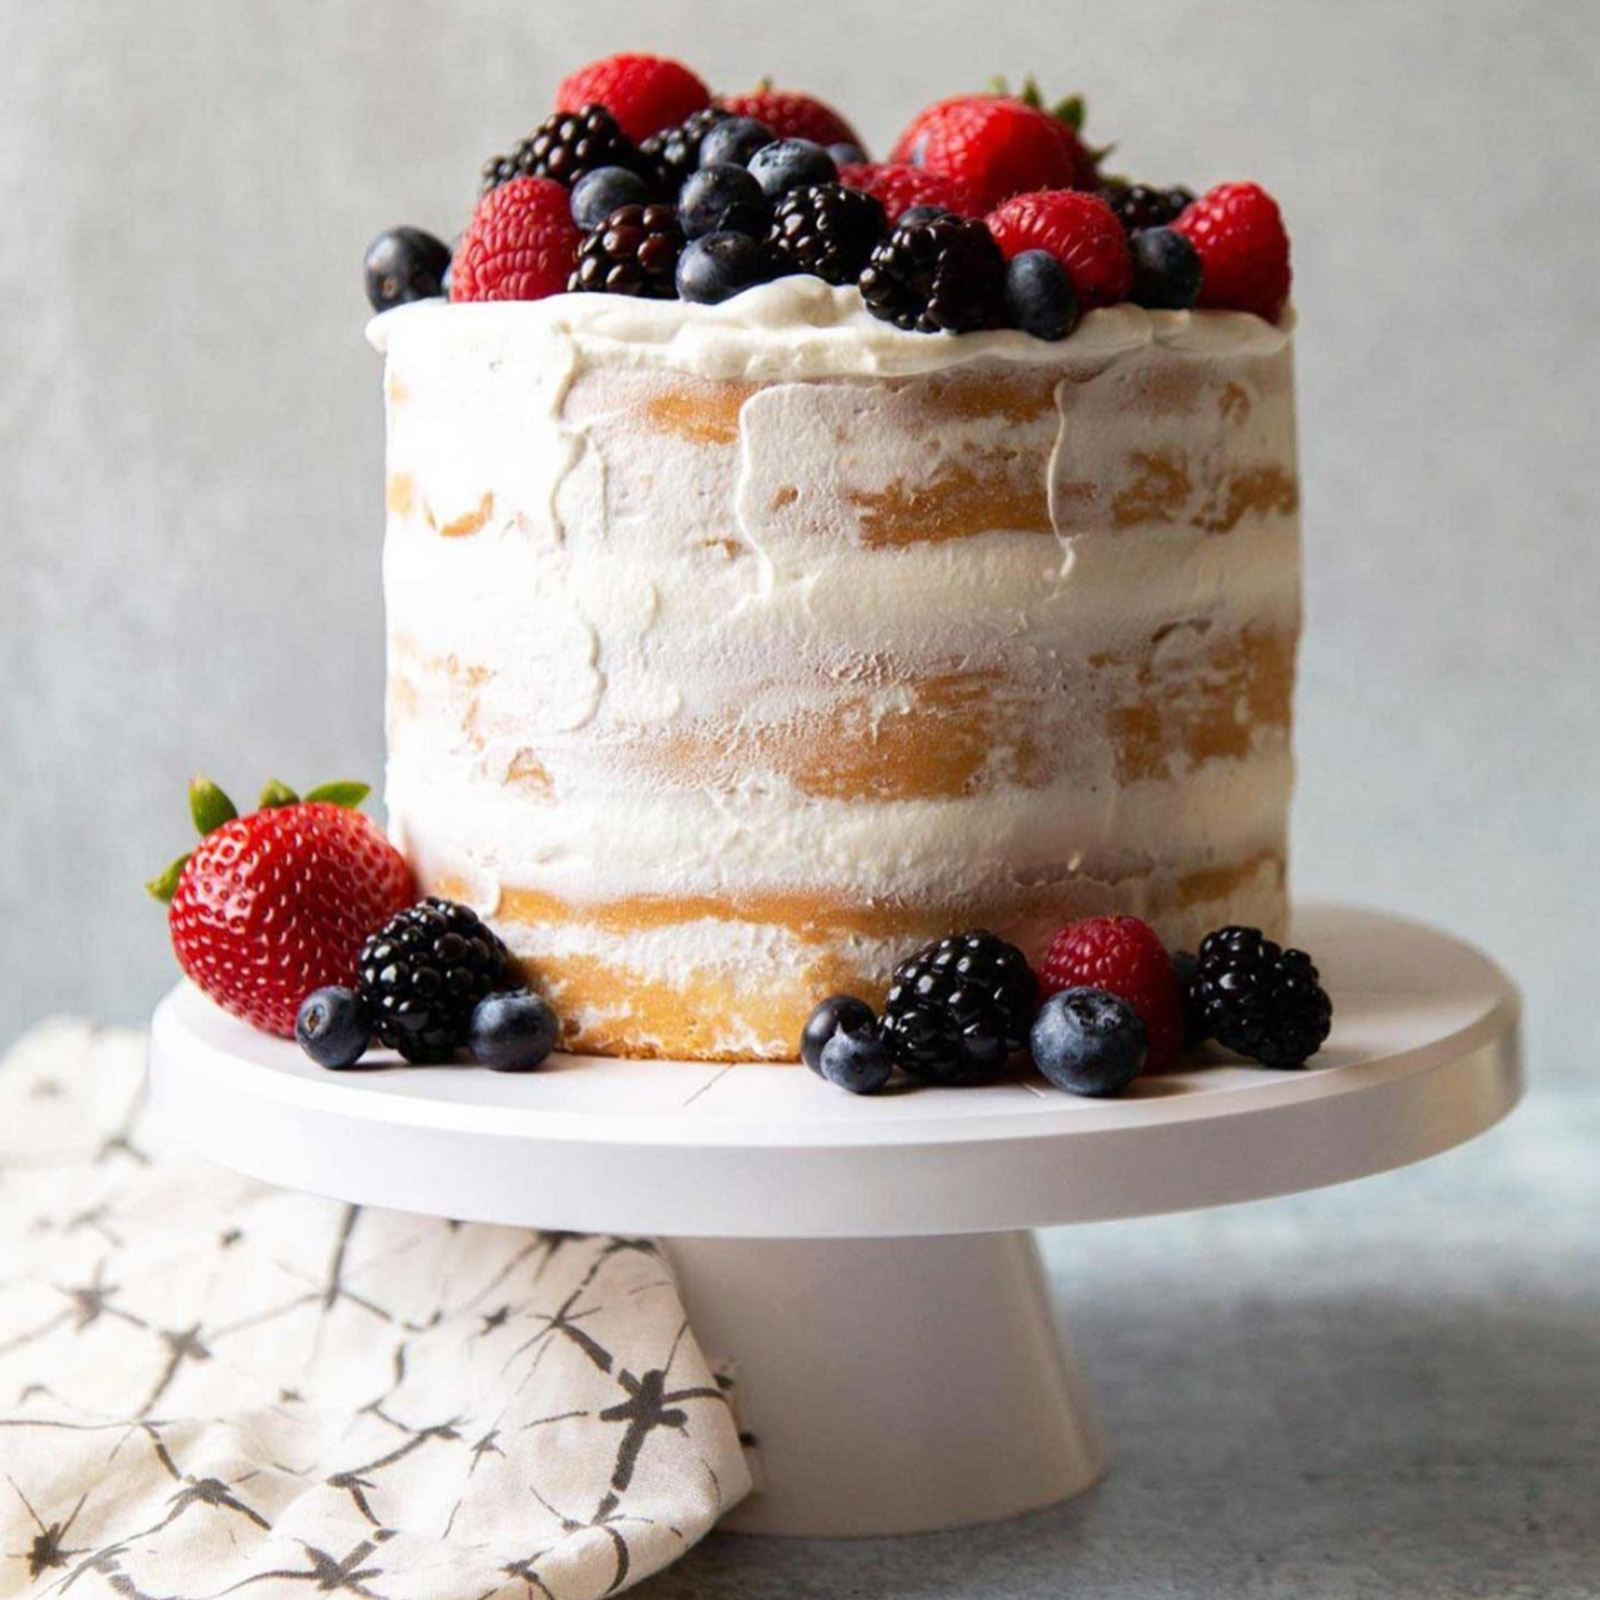 Coconut Cake with Whipped Cream and Fresh Berries by Maryanne Cabrera.